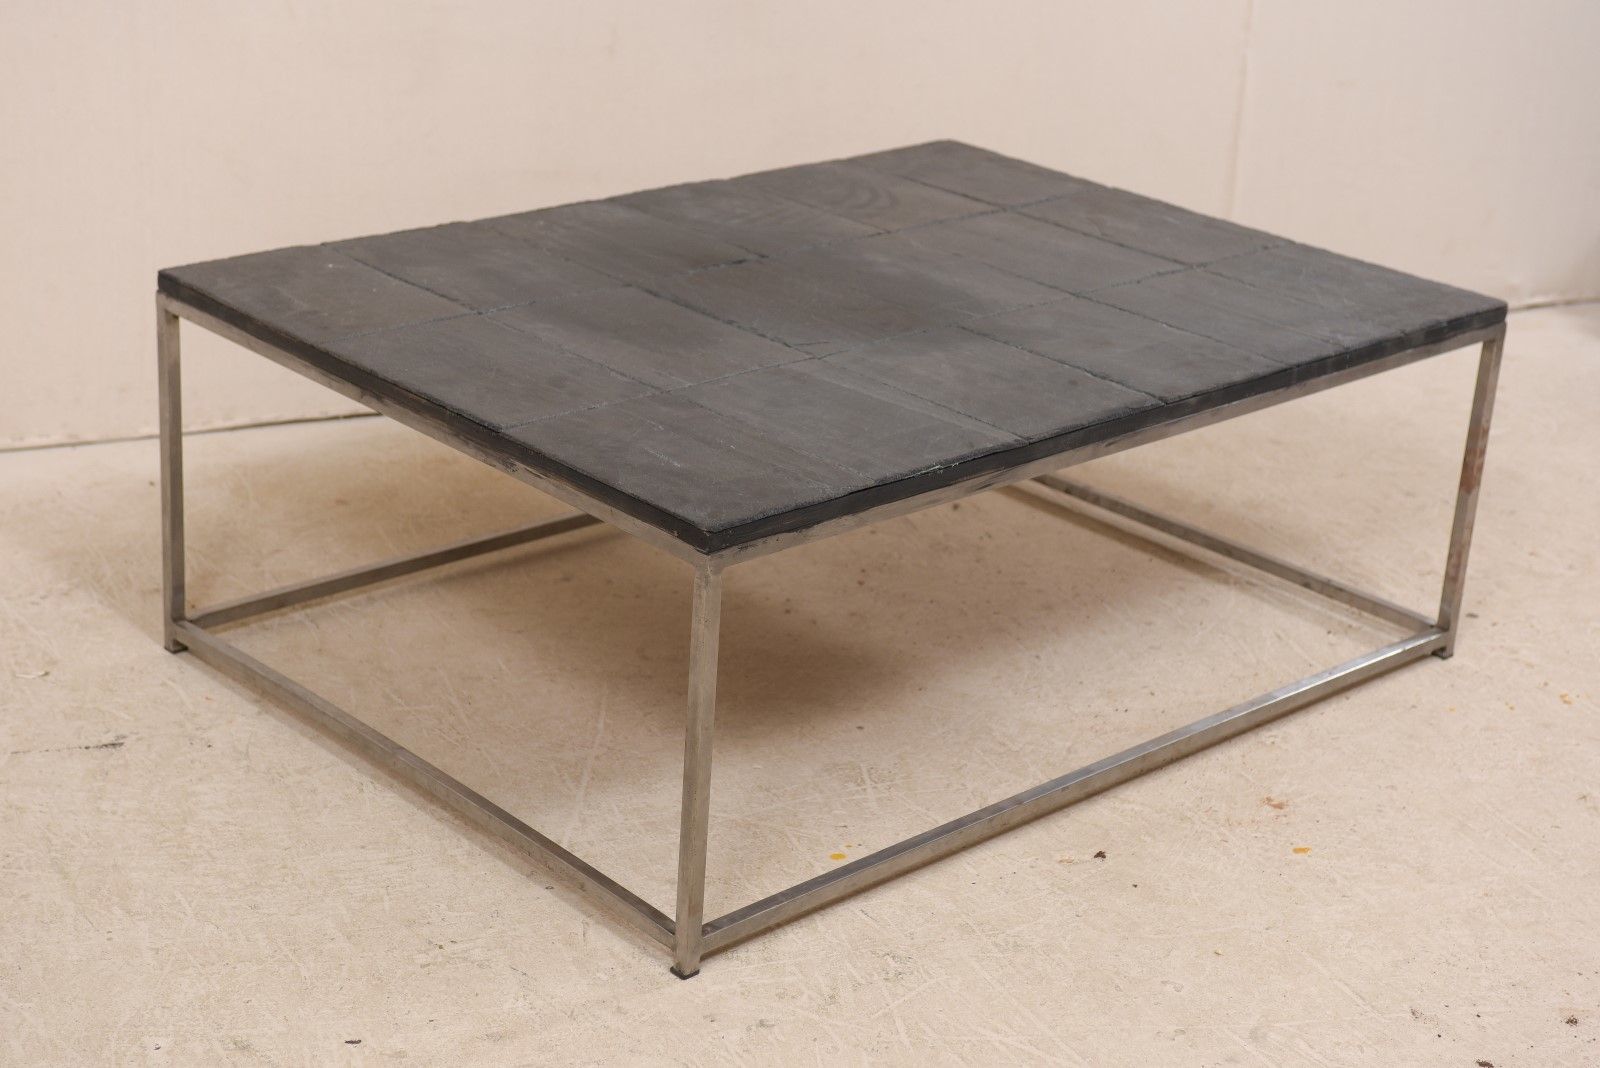 Slate Tile & Silver Metal Coffee Table | 1117 | A (View 15 of 15)